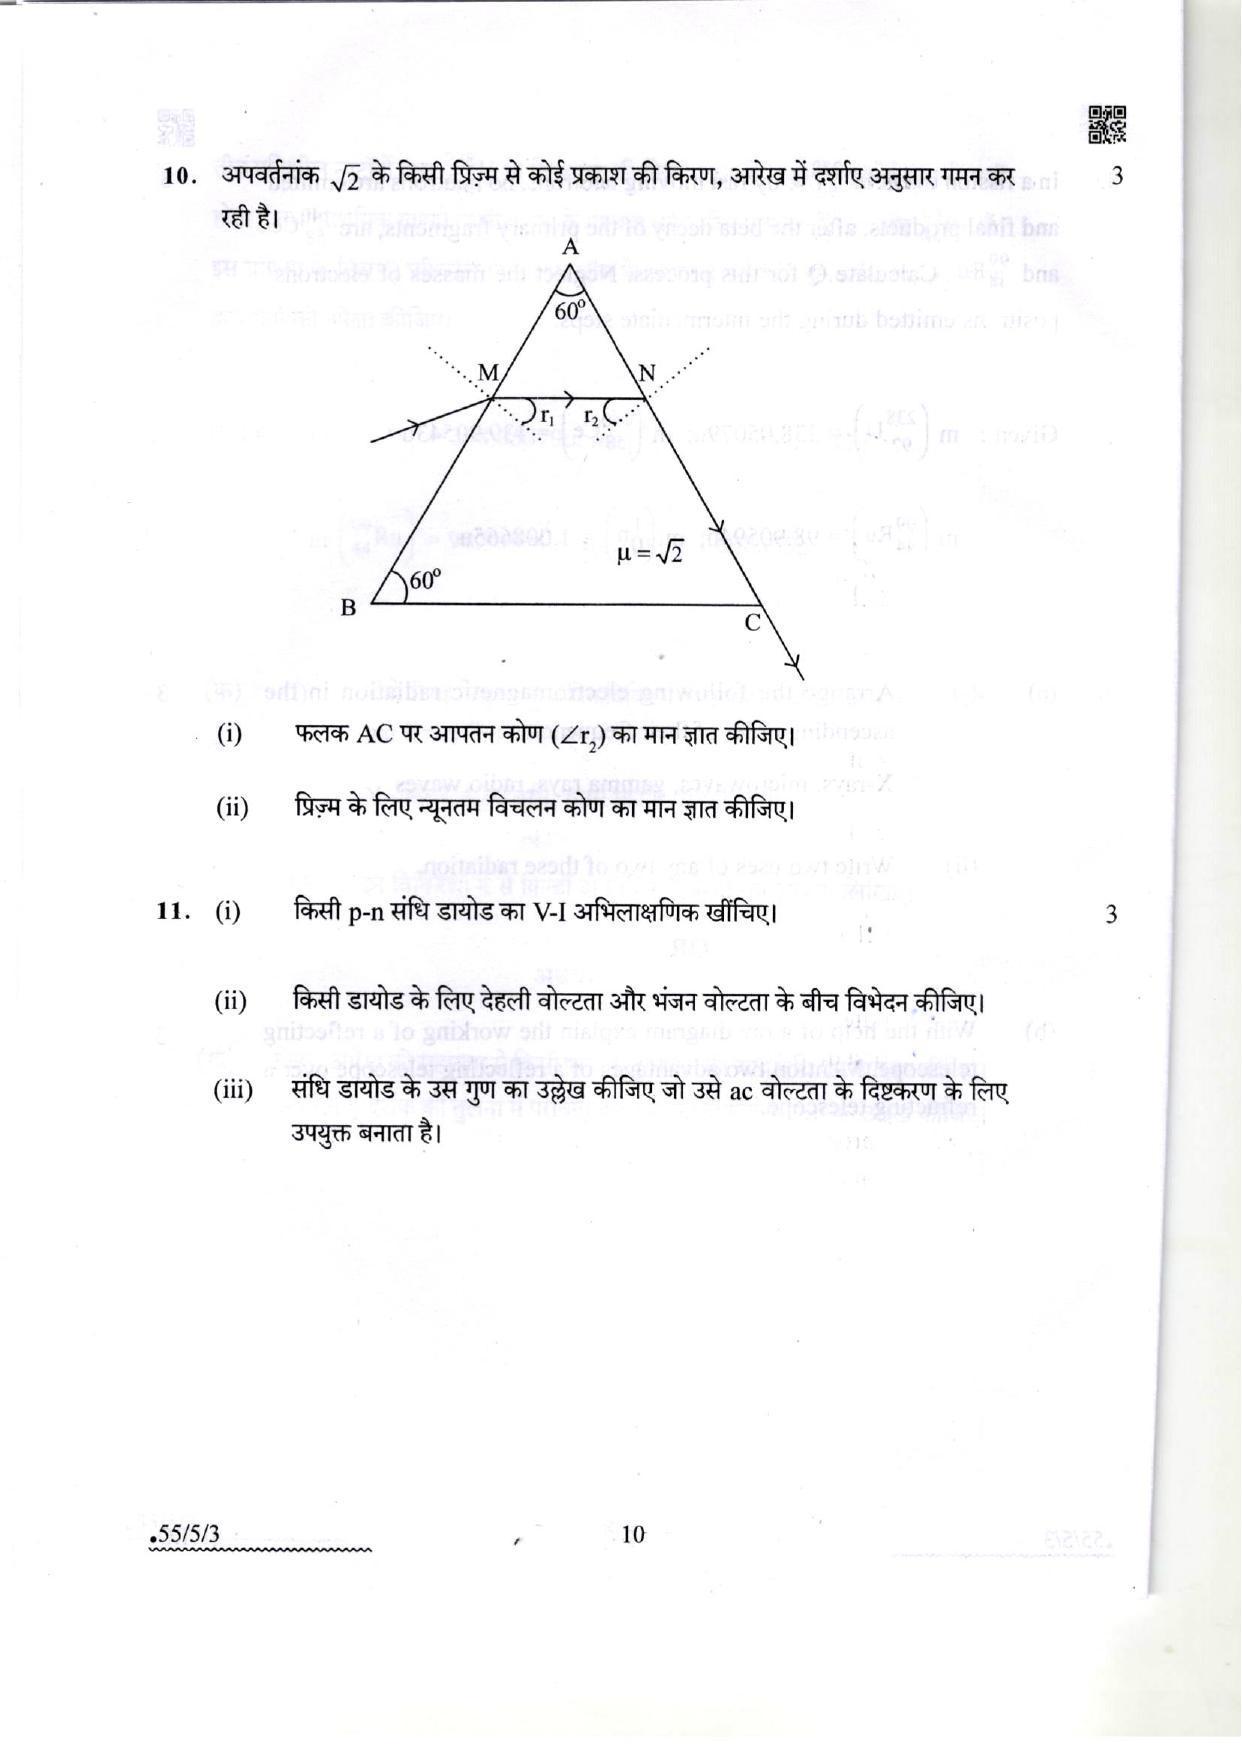 CBSE Class 12 55-5-3 Physics 2022 Question Paper - Page 10